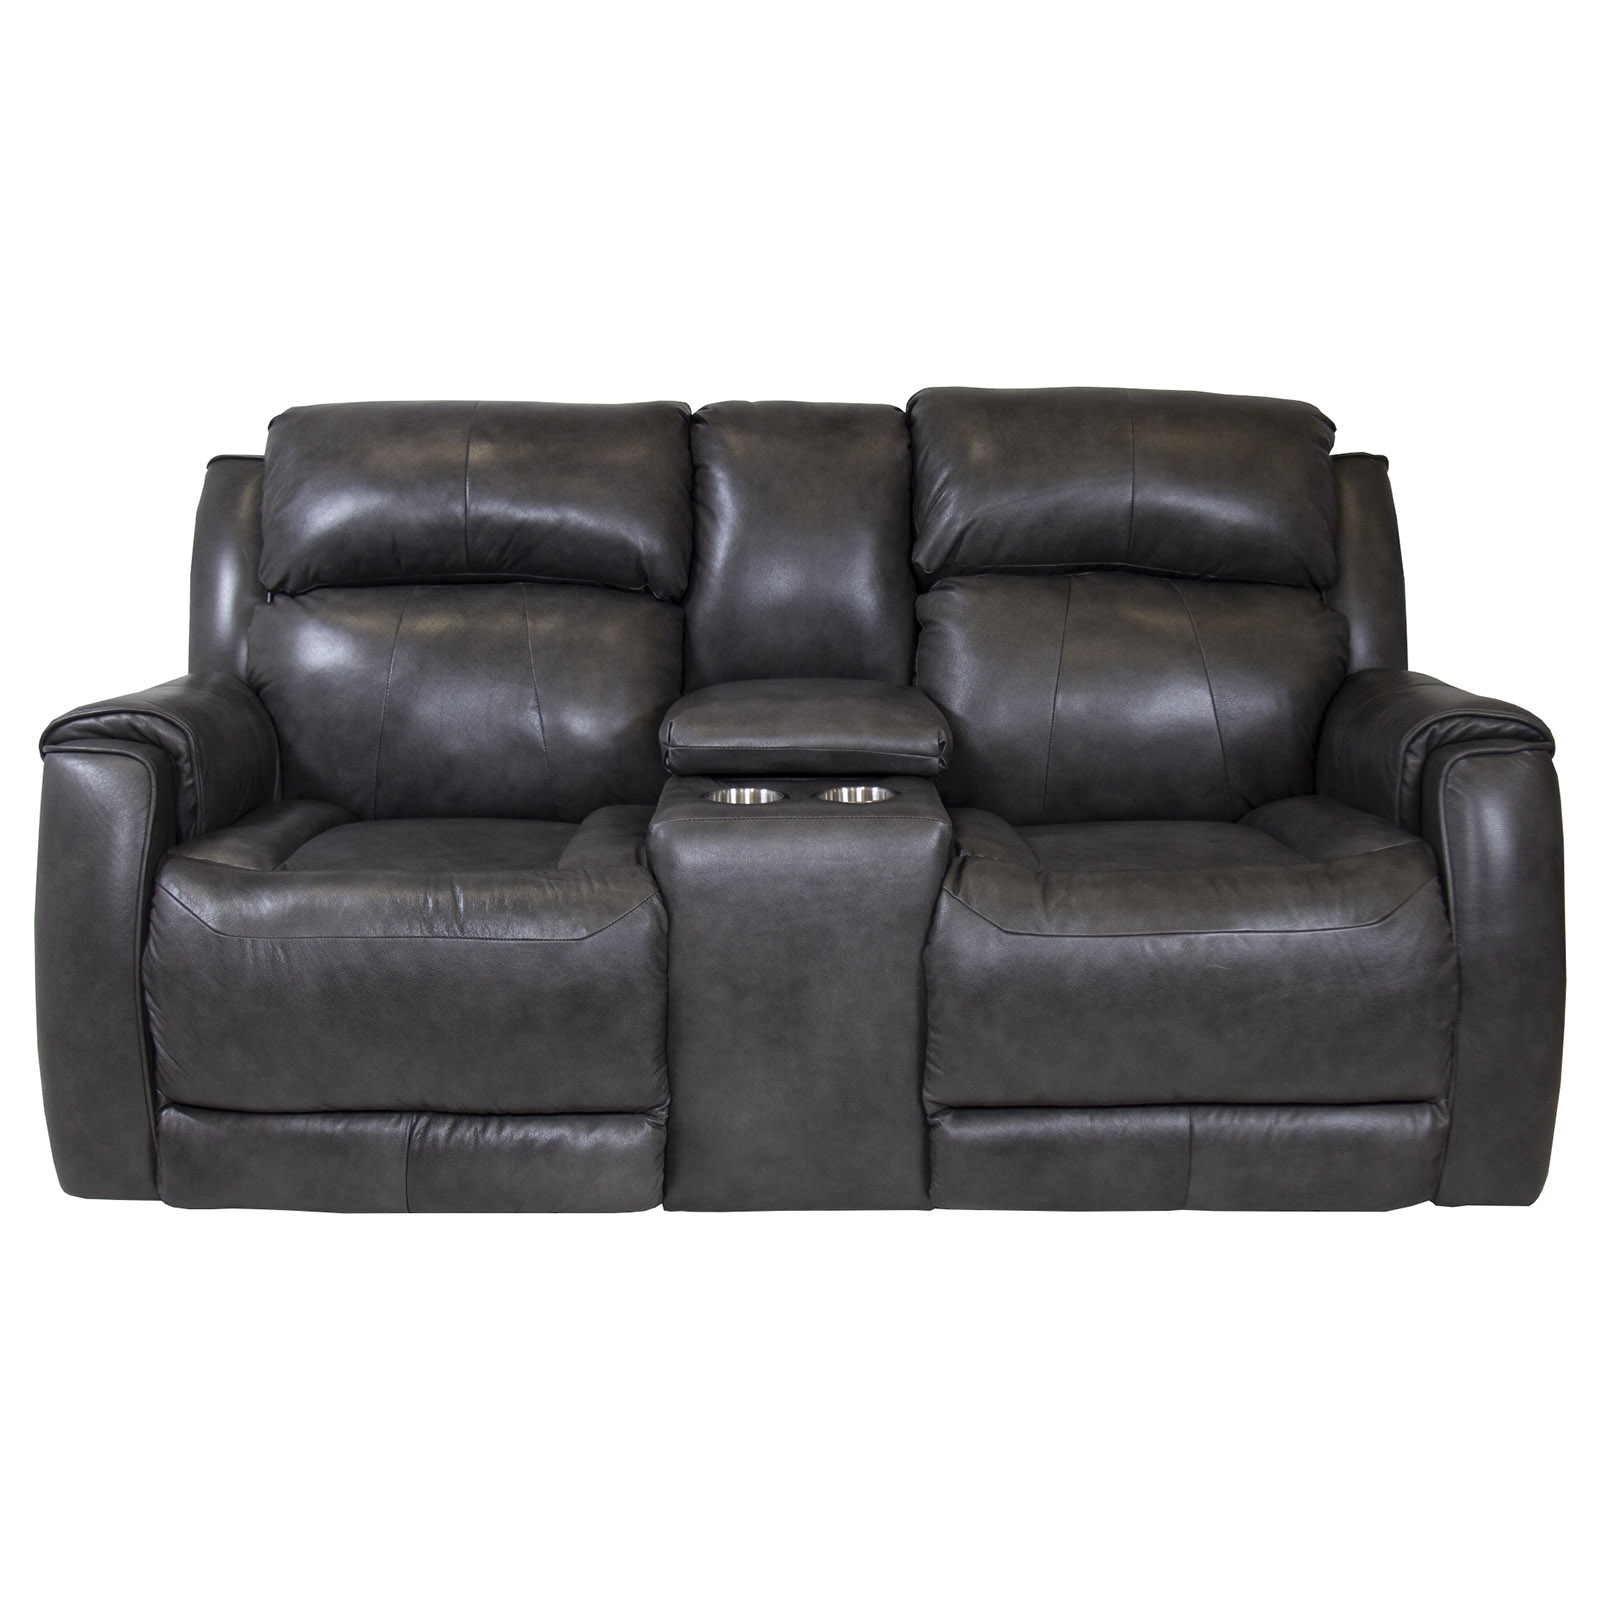 Southern Motion Valentino Slate Leather Power Reclining Loveseat with Power Headrest